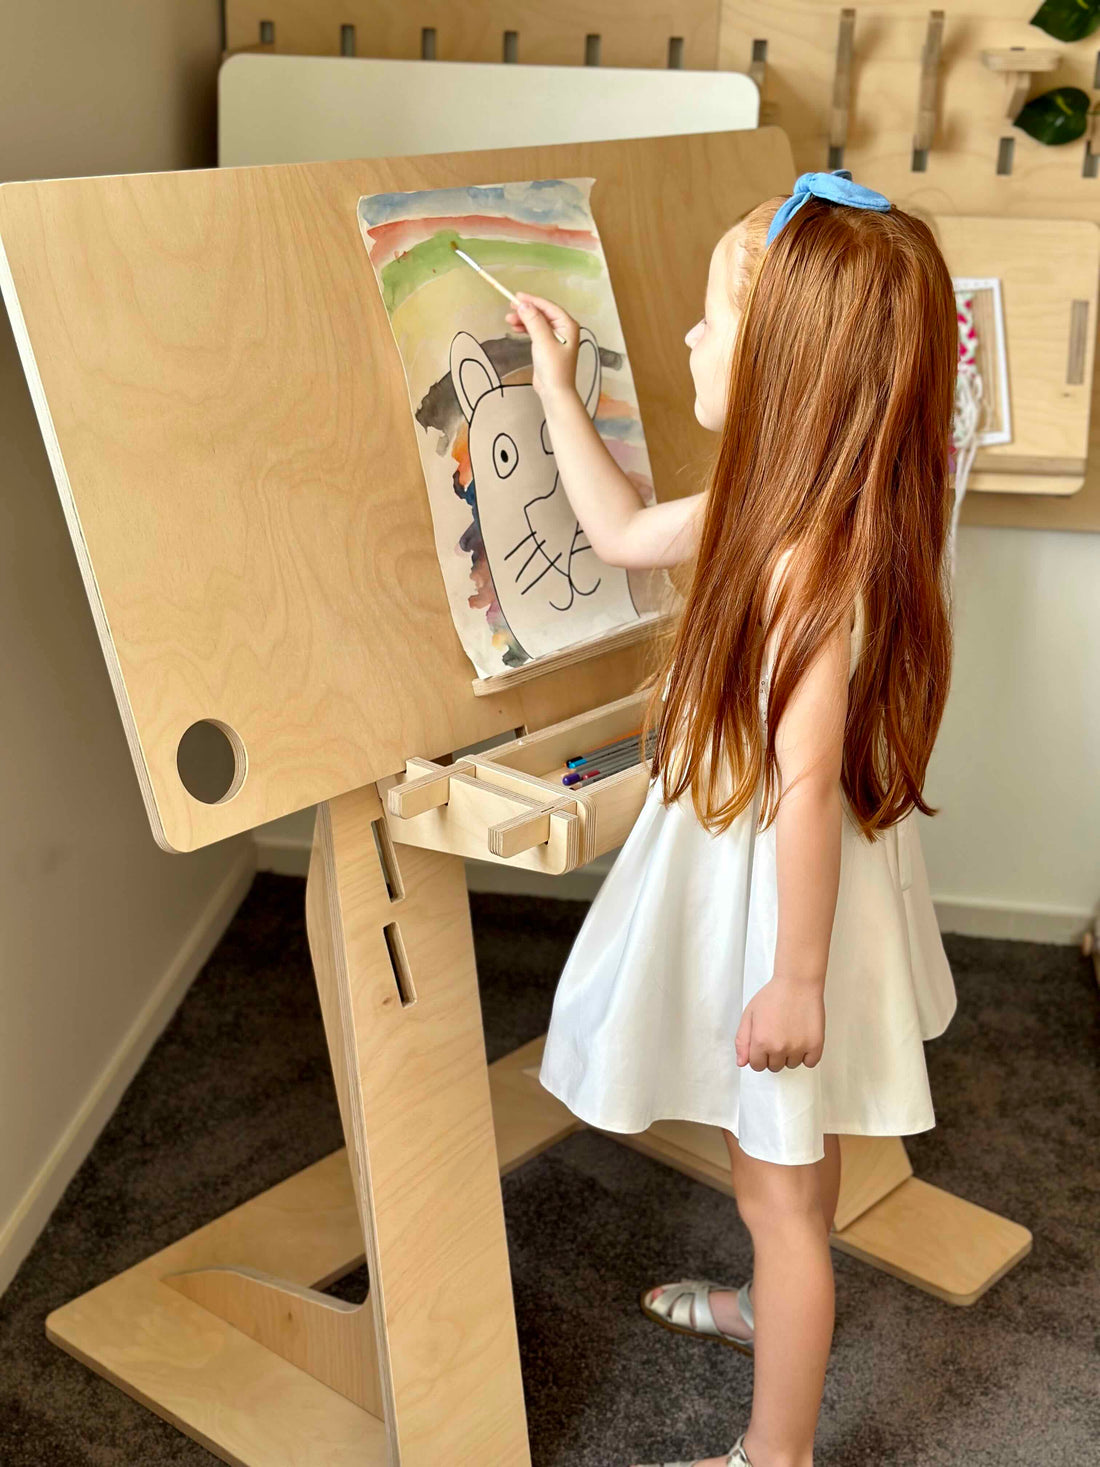 Enhance your child's learning space with our versatile standing desk and easel, designed for healthy posture and endless creativity.